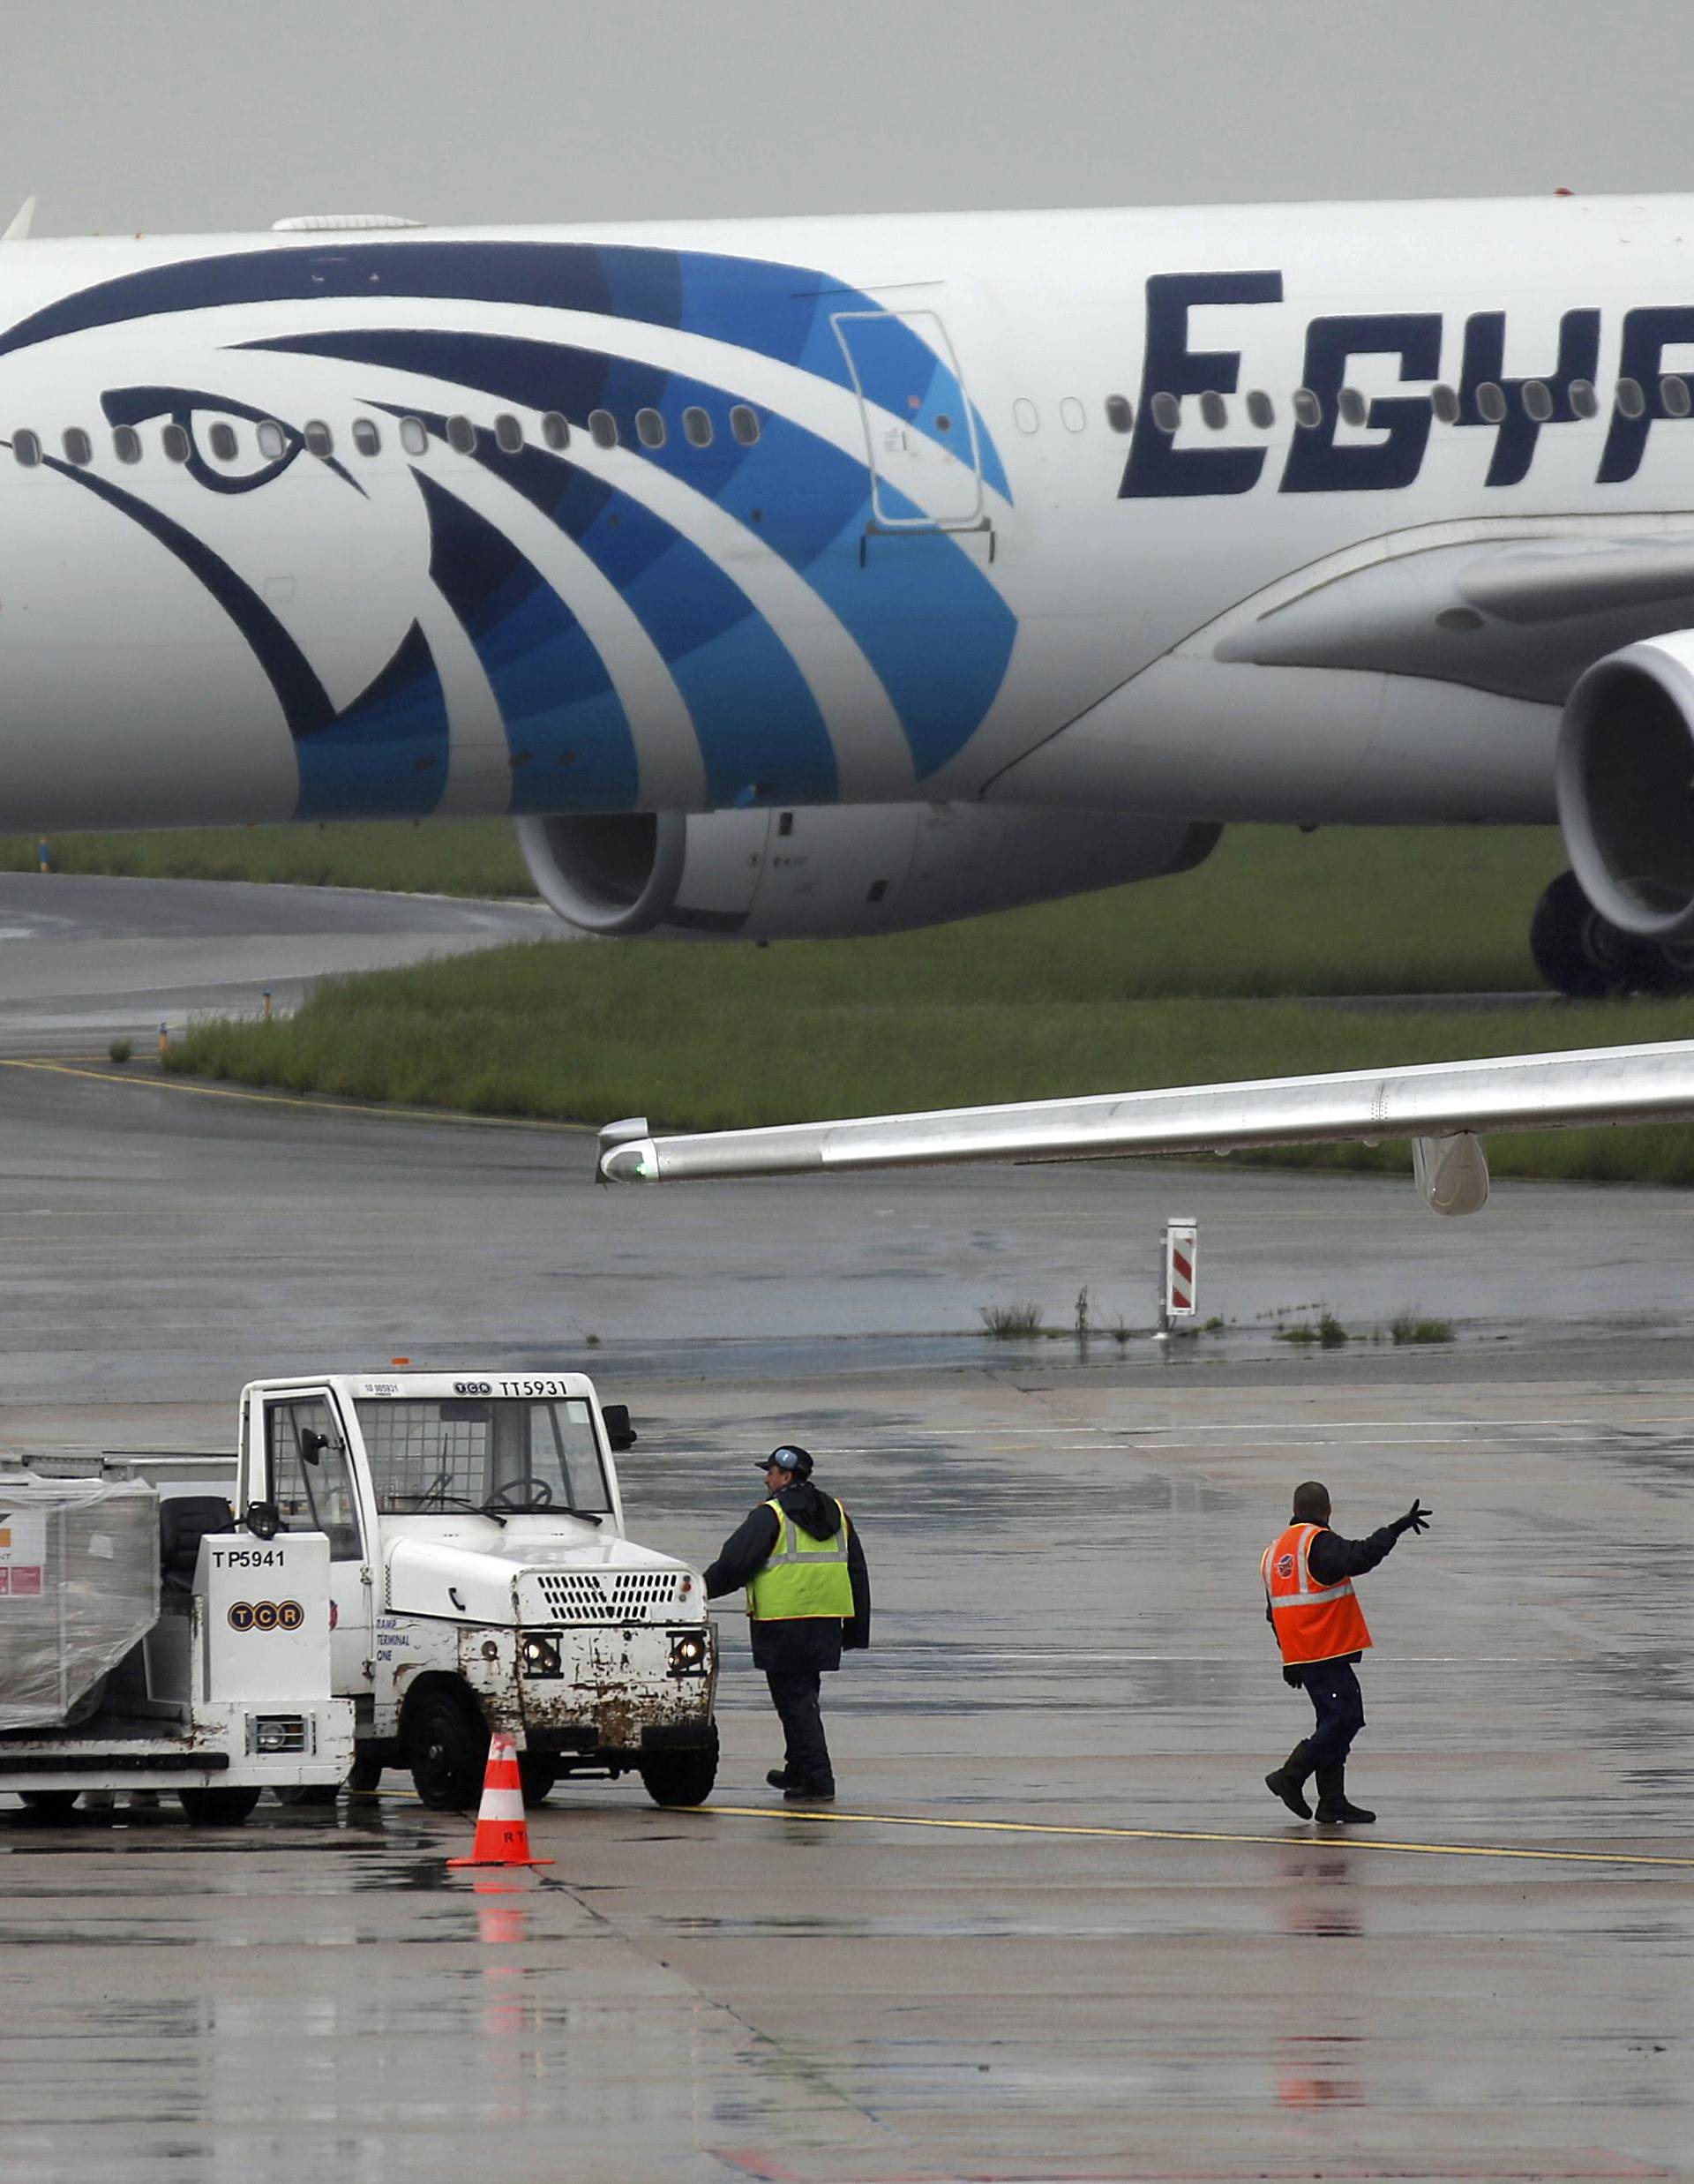 The EgyptAir plane scheduled to make the following flight from Paris to Cairo  taxies on the tarmac at Charles de Gaulle airport in Paris